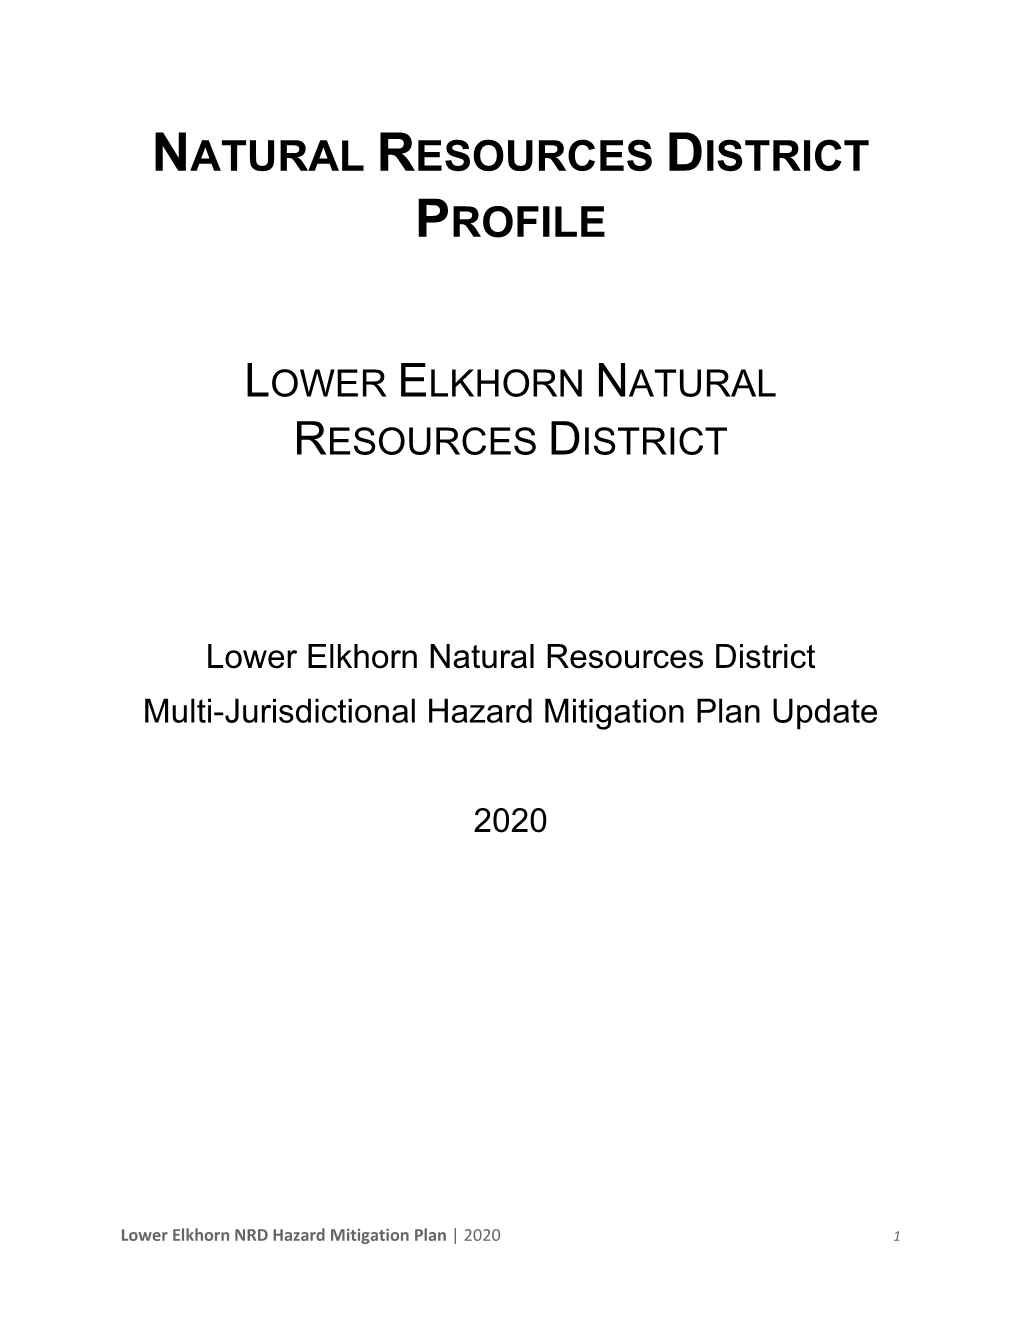 Natural Resources District Profile